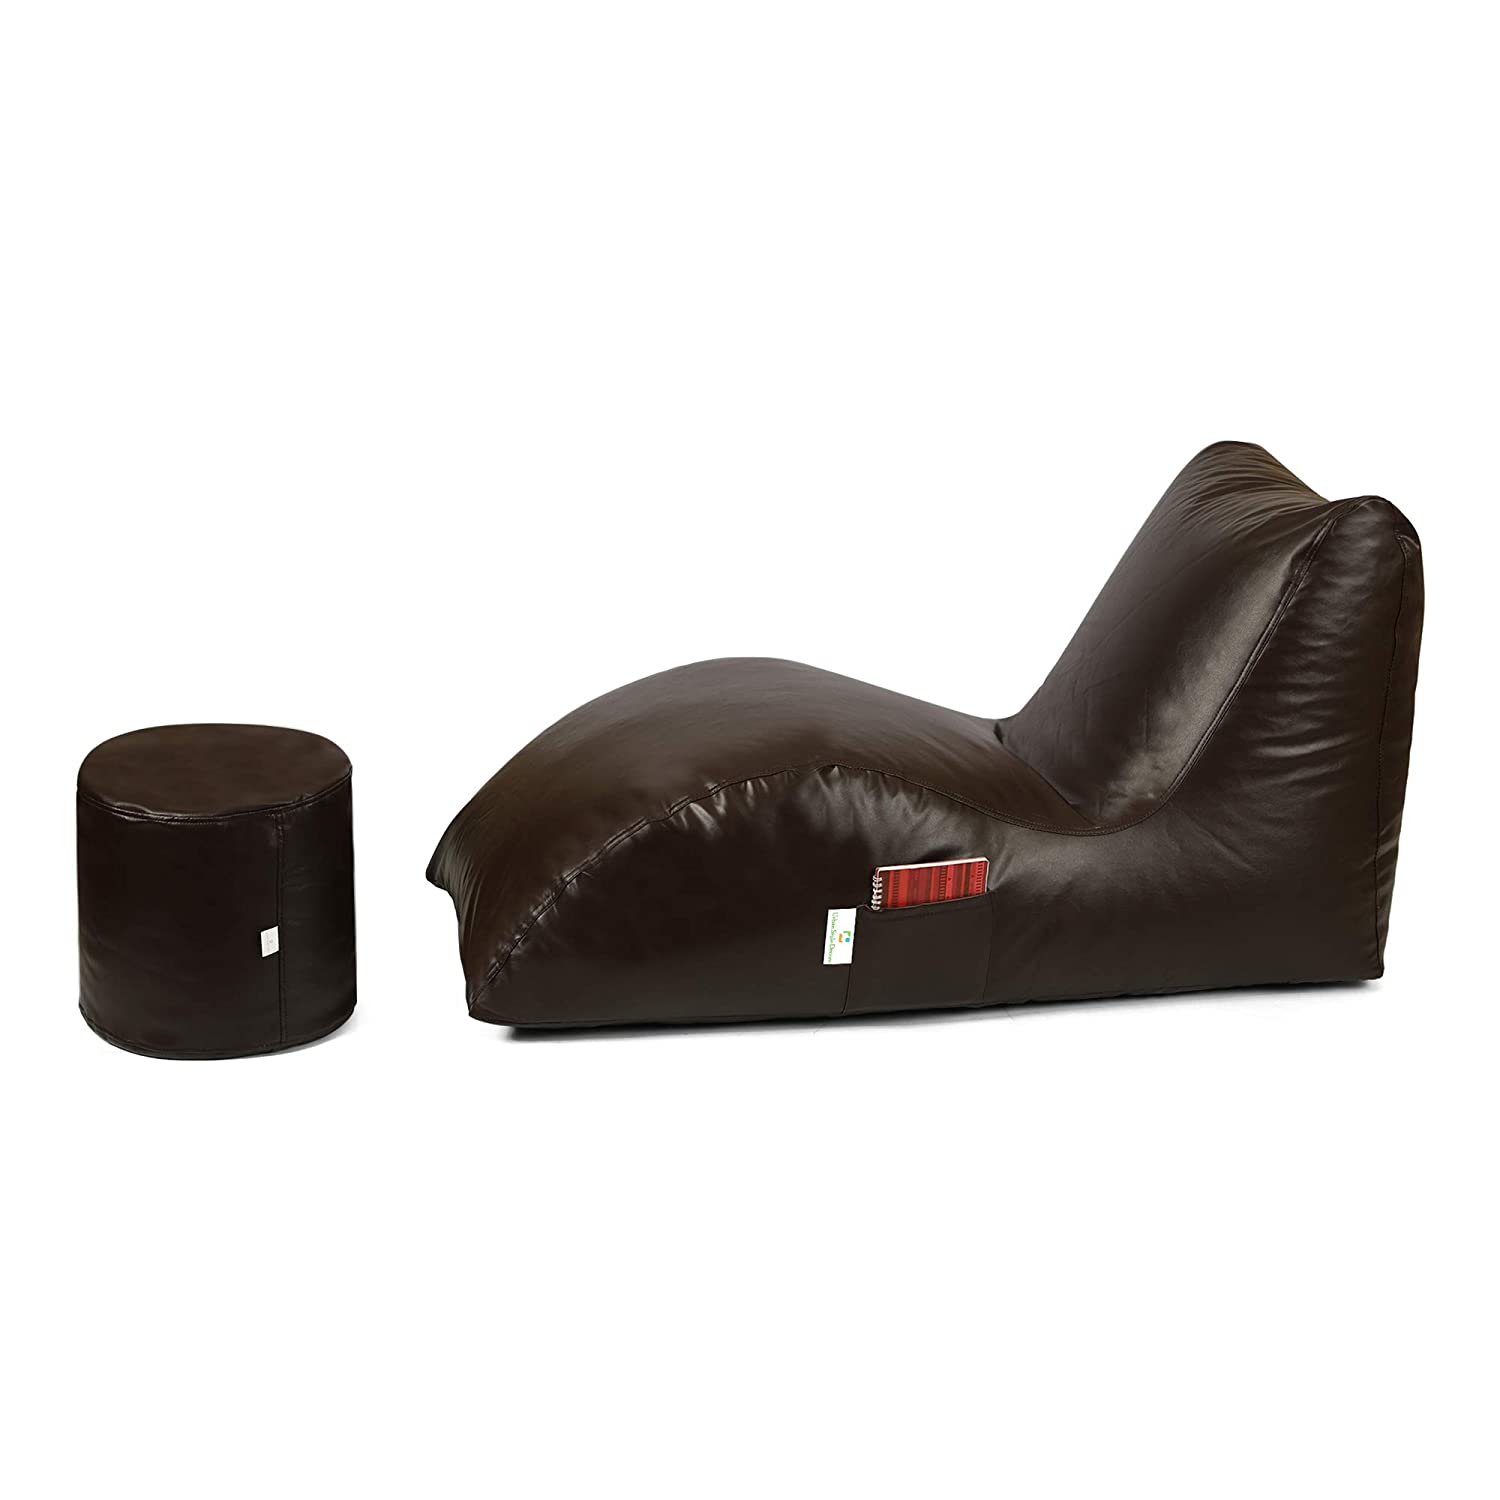 Urban Style Decore Jumbo Lounger Filled Bean Bags with Footrest